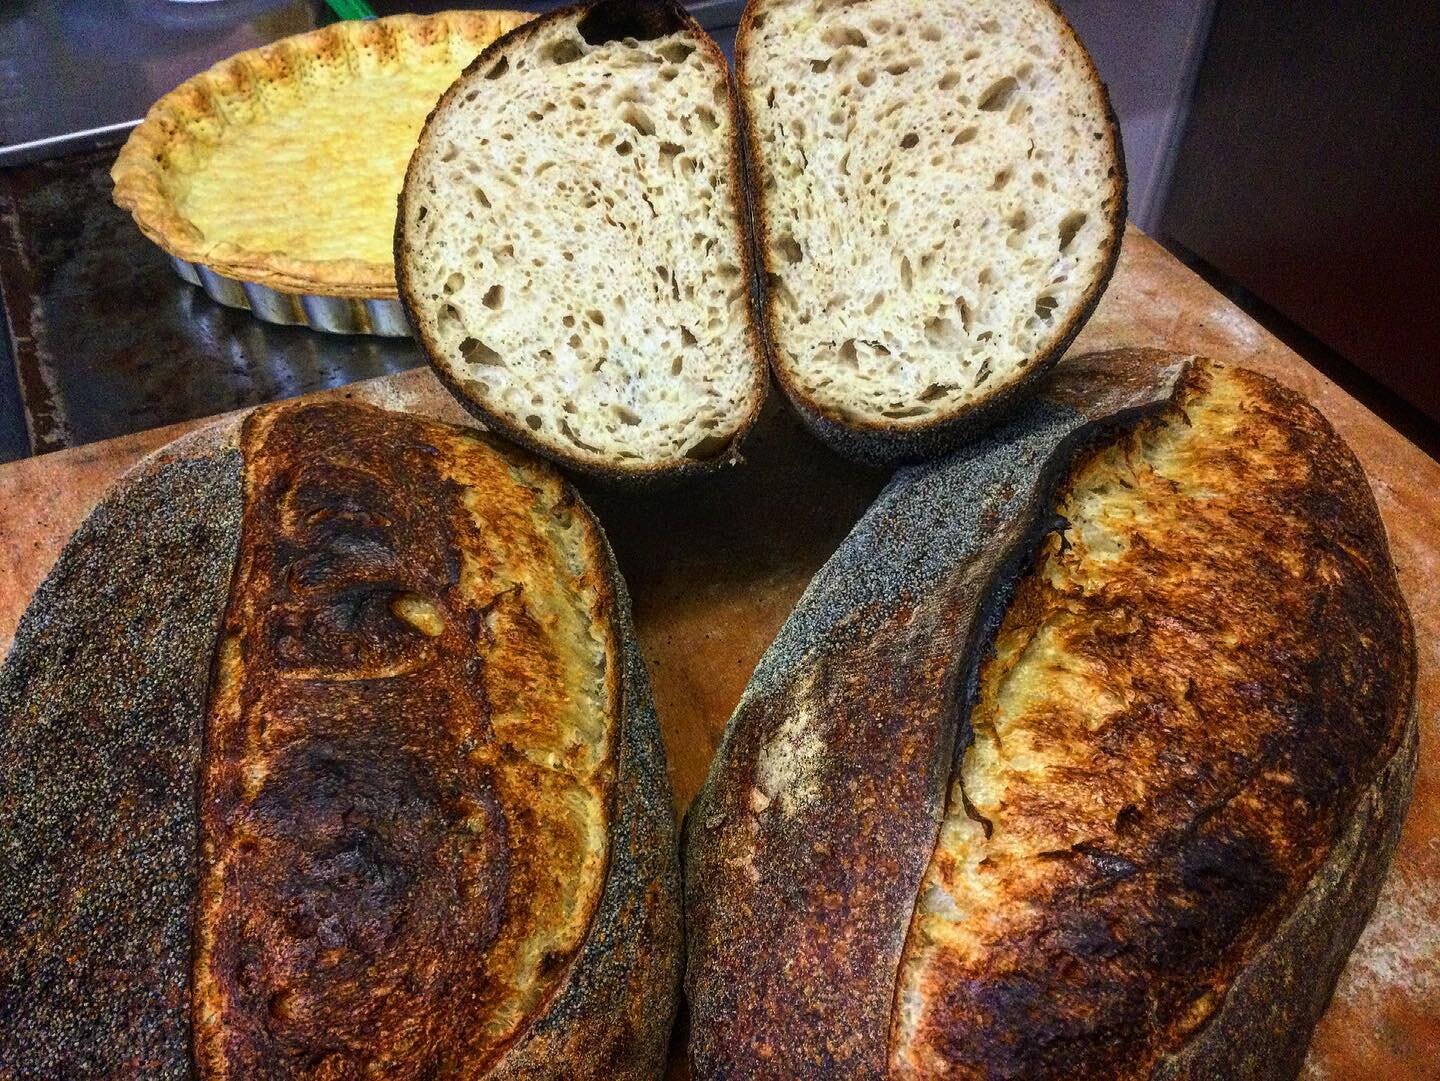 &lsquo;Potato&amp;Poppy Seed Sourdough&rsquo; was a great success this weekend , great taste and super soft, in the RM 2020 oven 👍